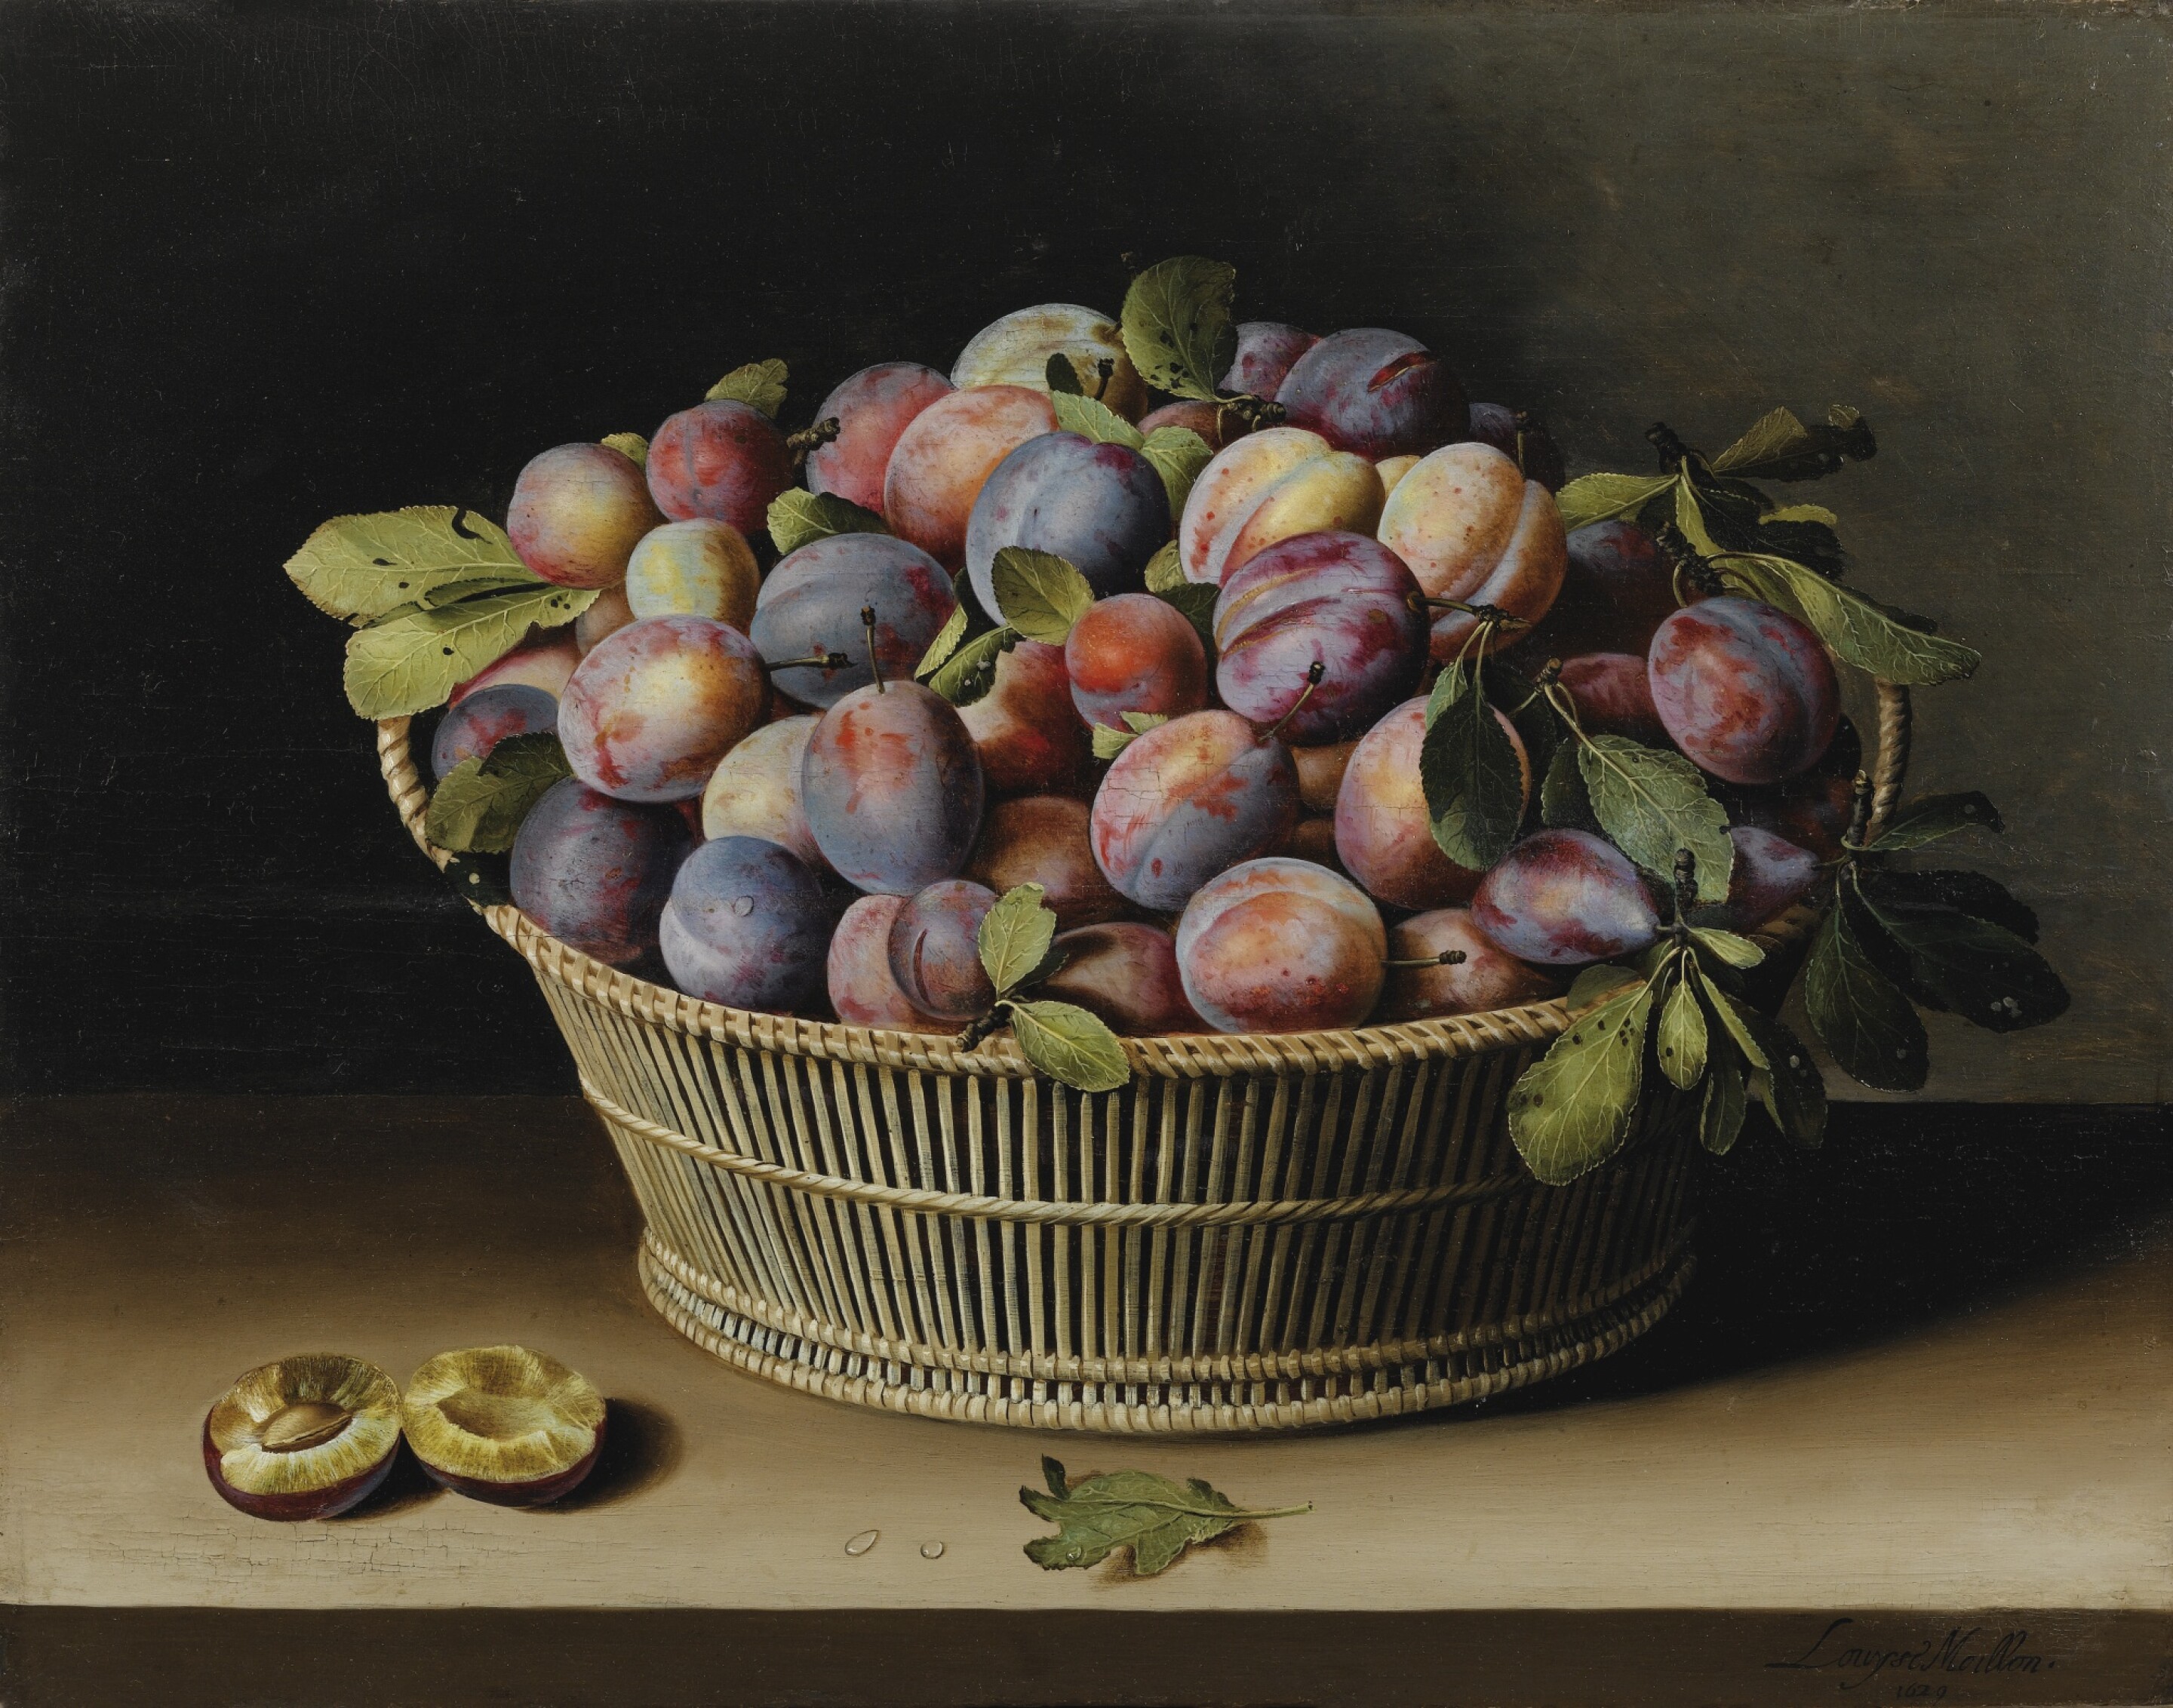 Basket of Plums by Louise Moillon - 1629 - 41 x 53 cm private collection